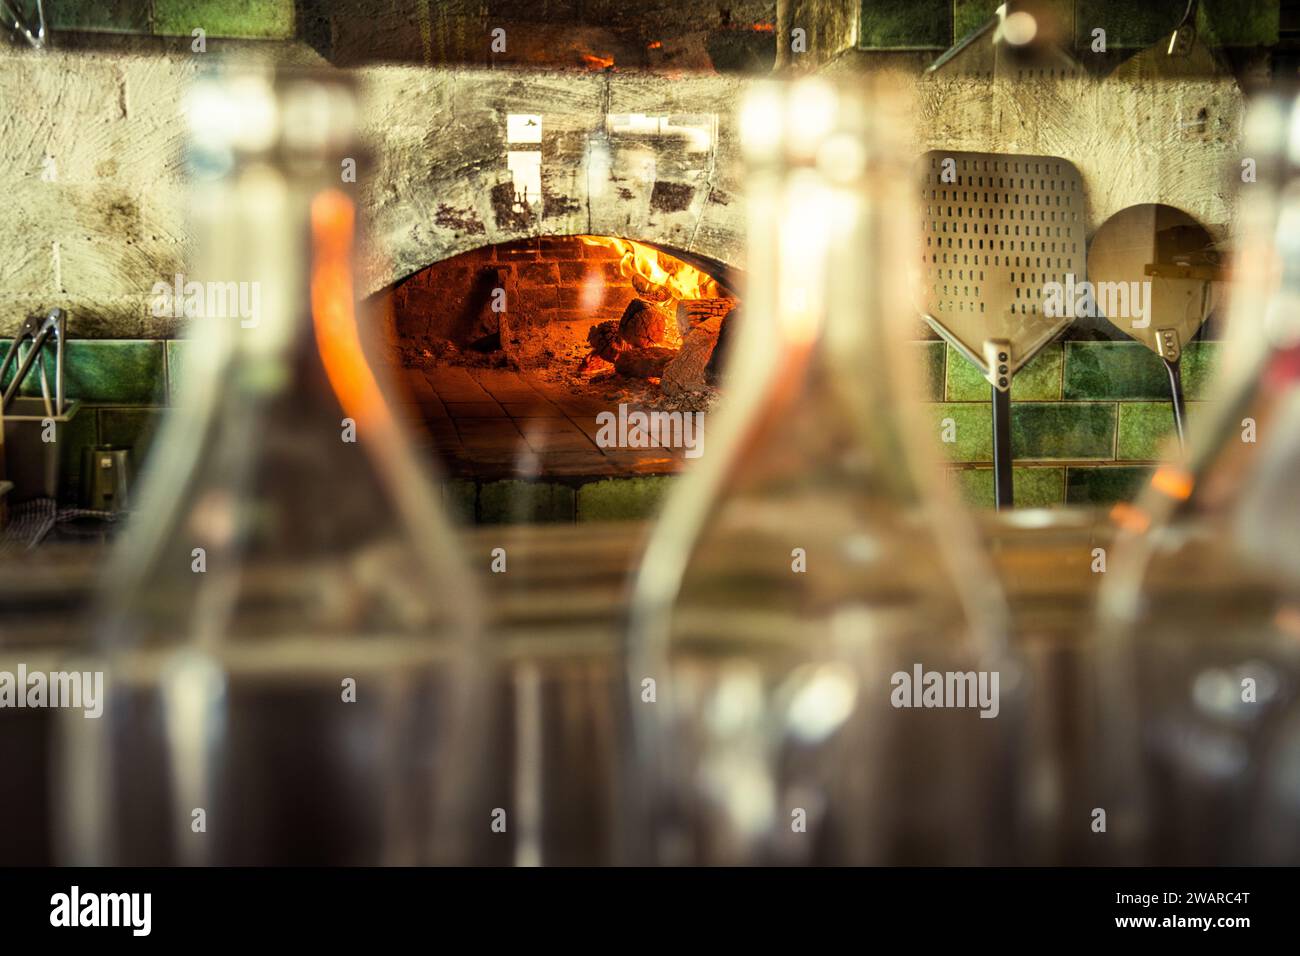 Three empty clear glass bottles arranged next to a white oven Stock Photo